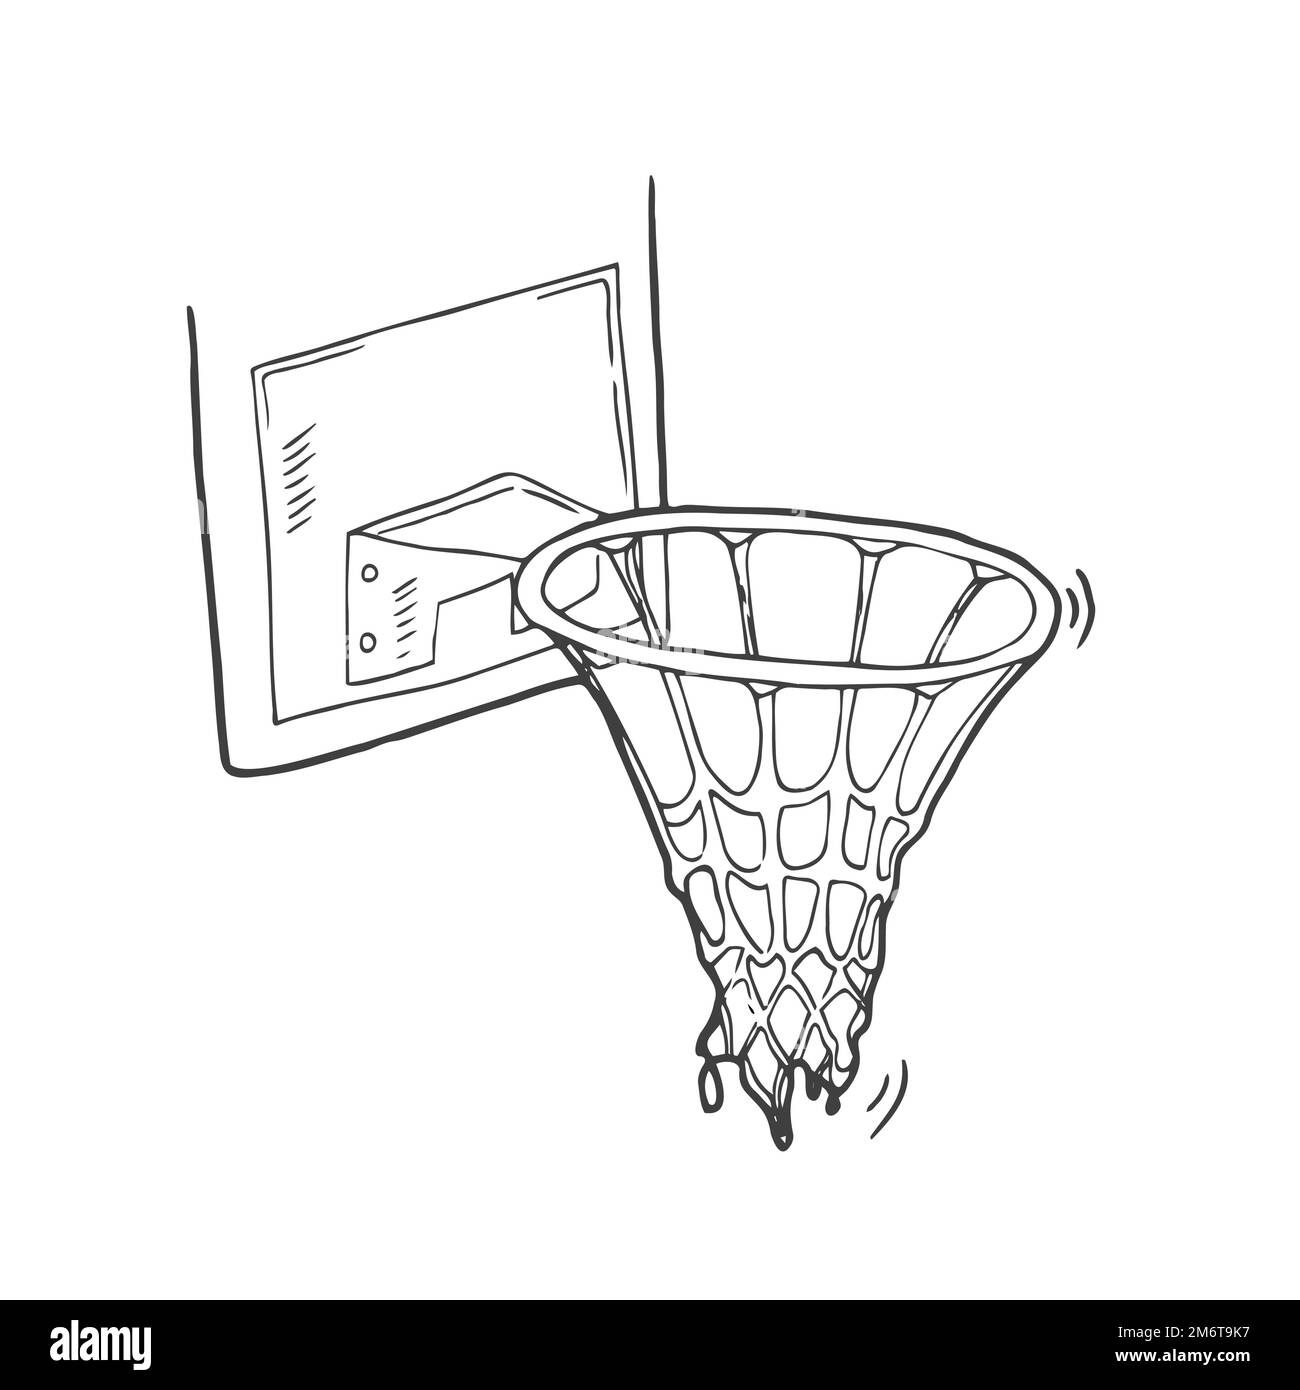 Basketball board. Isolated vector on white background Stock Vector